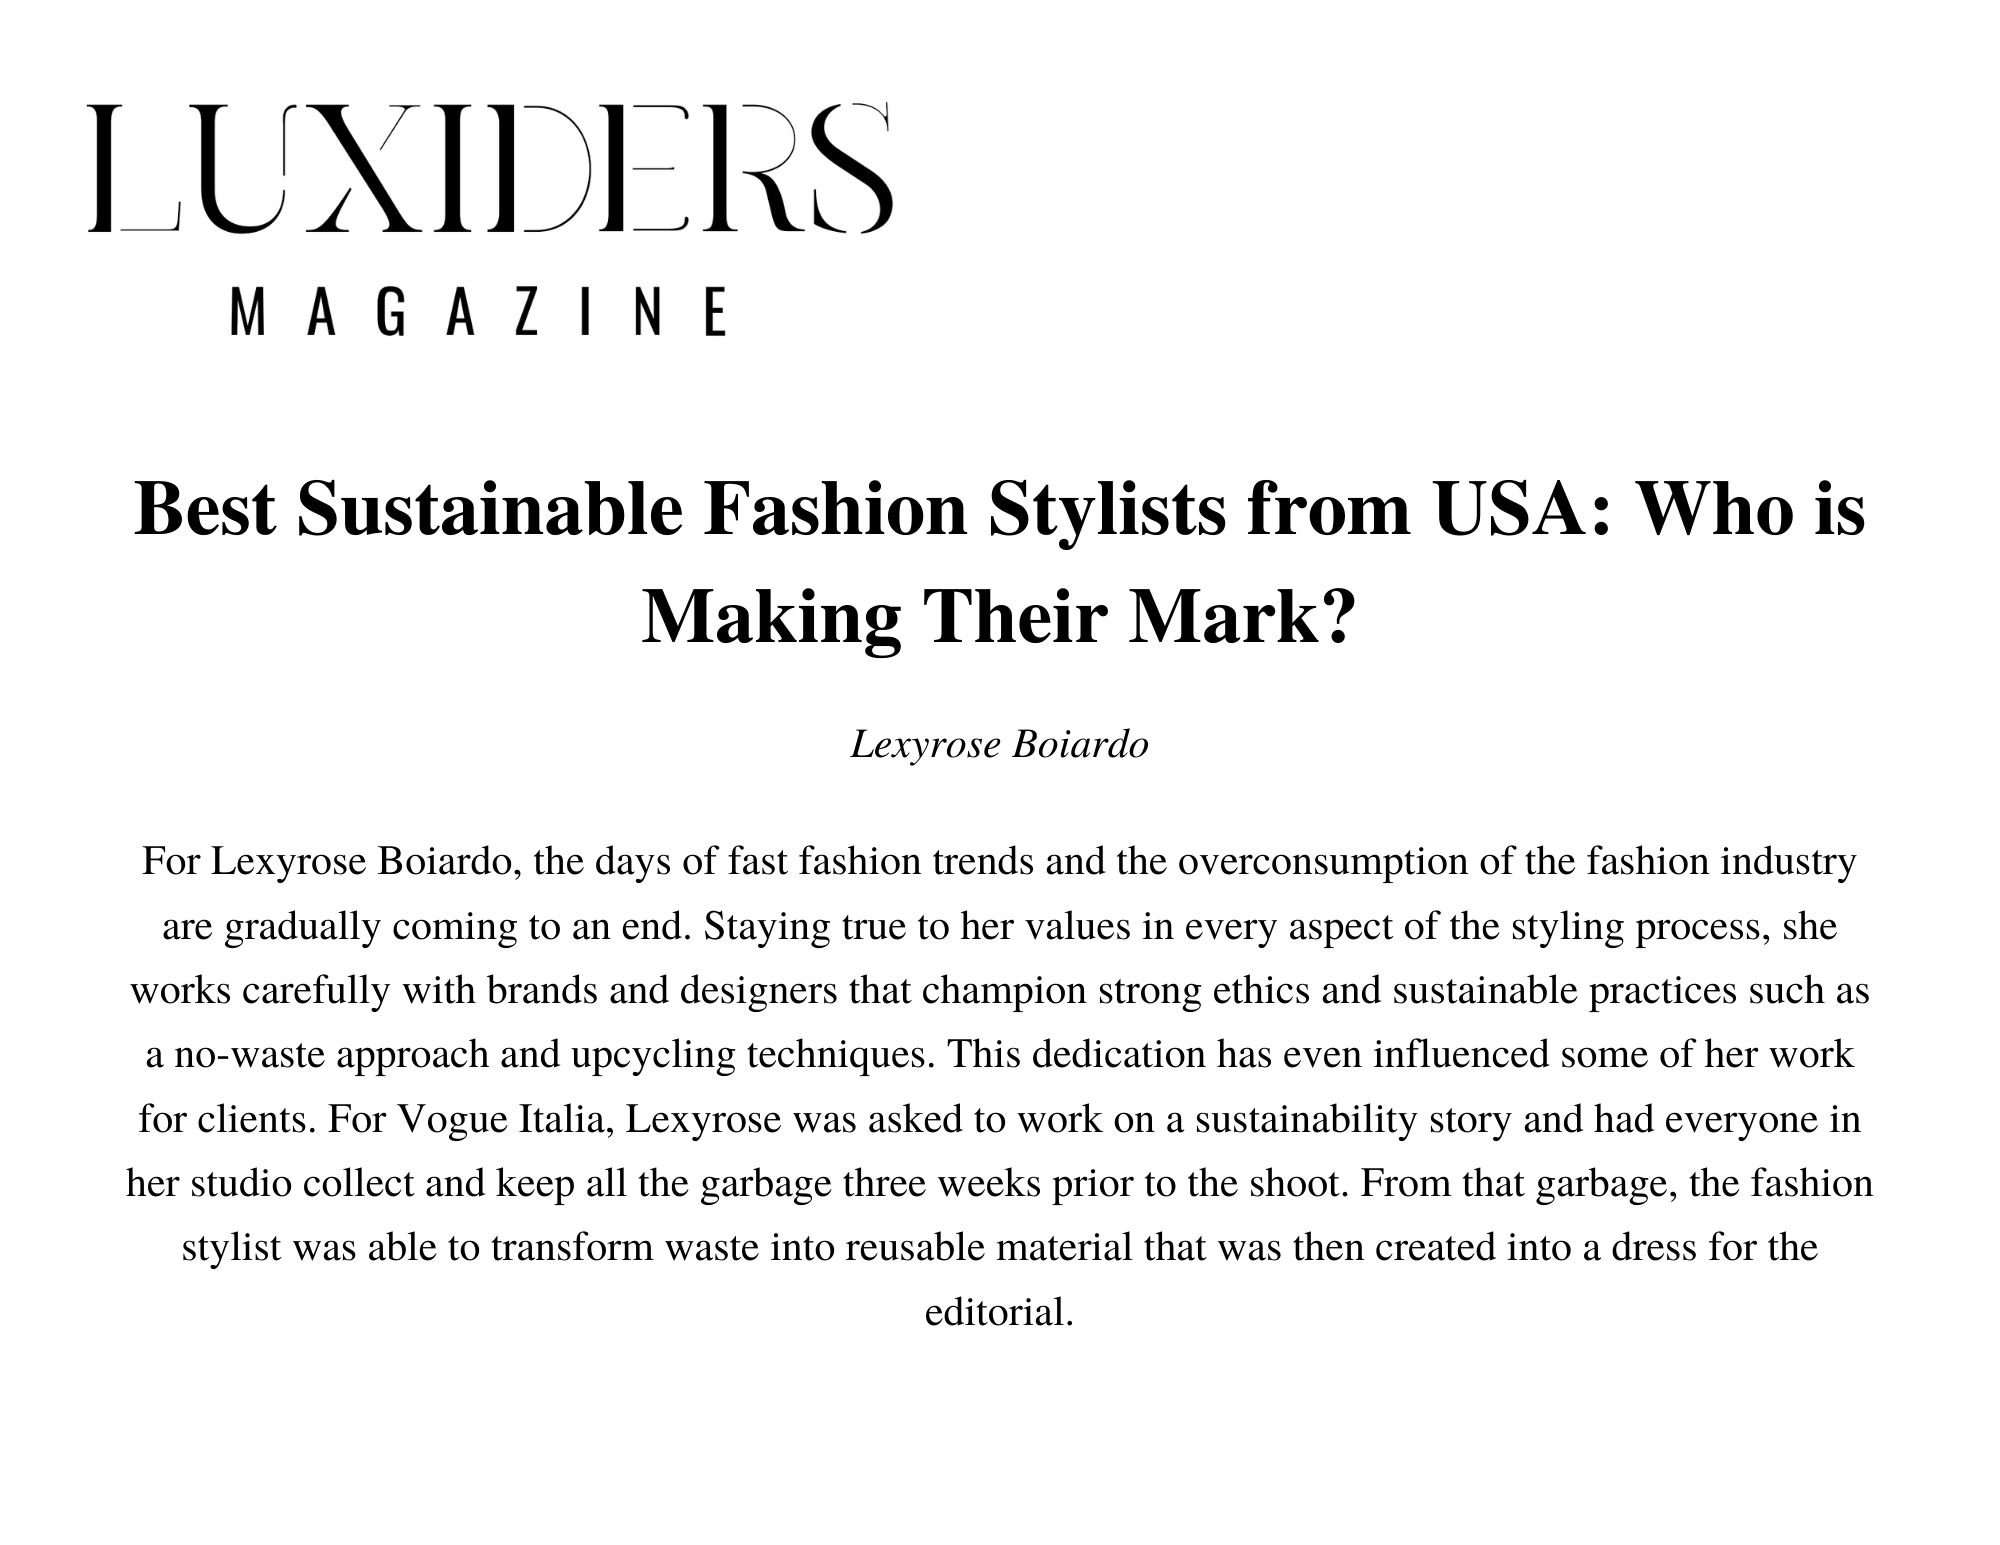 Best Sustainable Fashion Stylists from USA Who is Making Their Mark.jpg